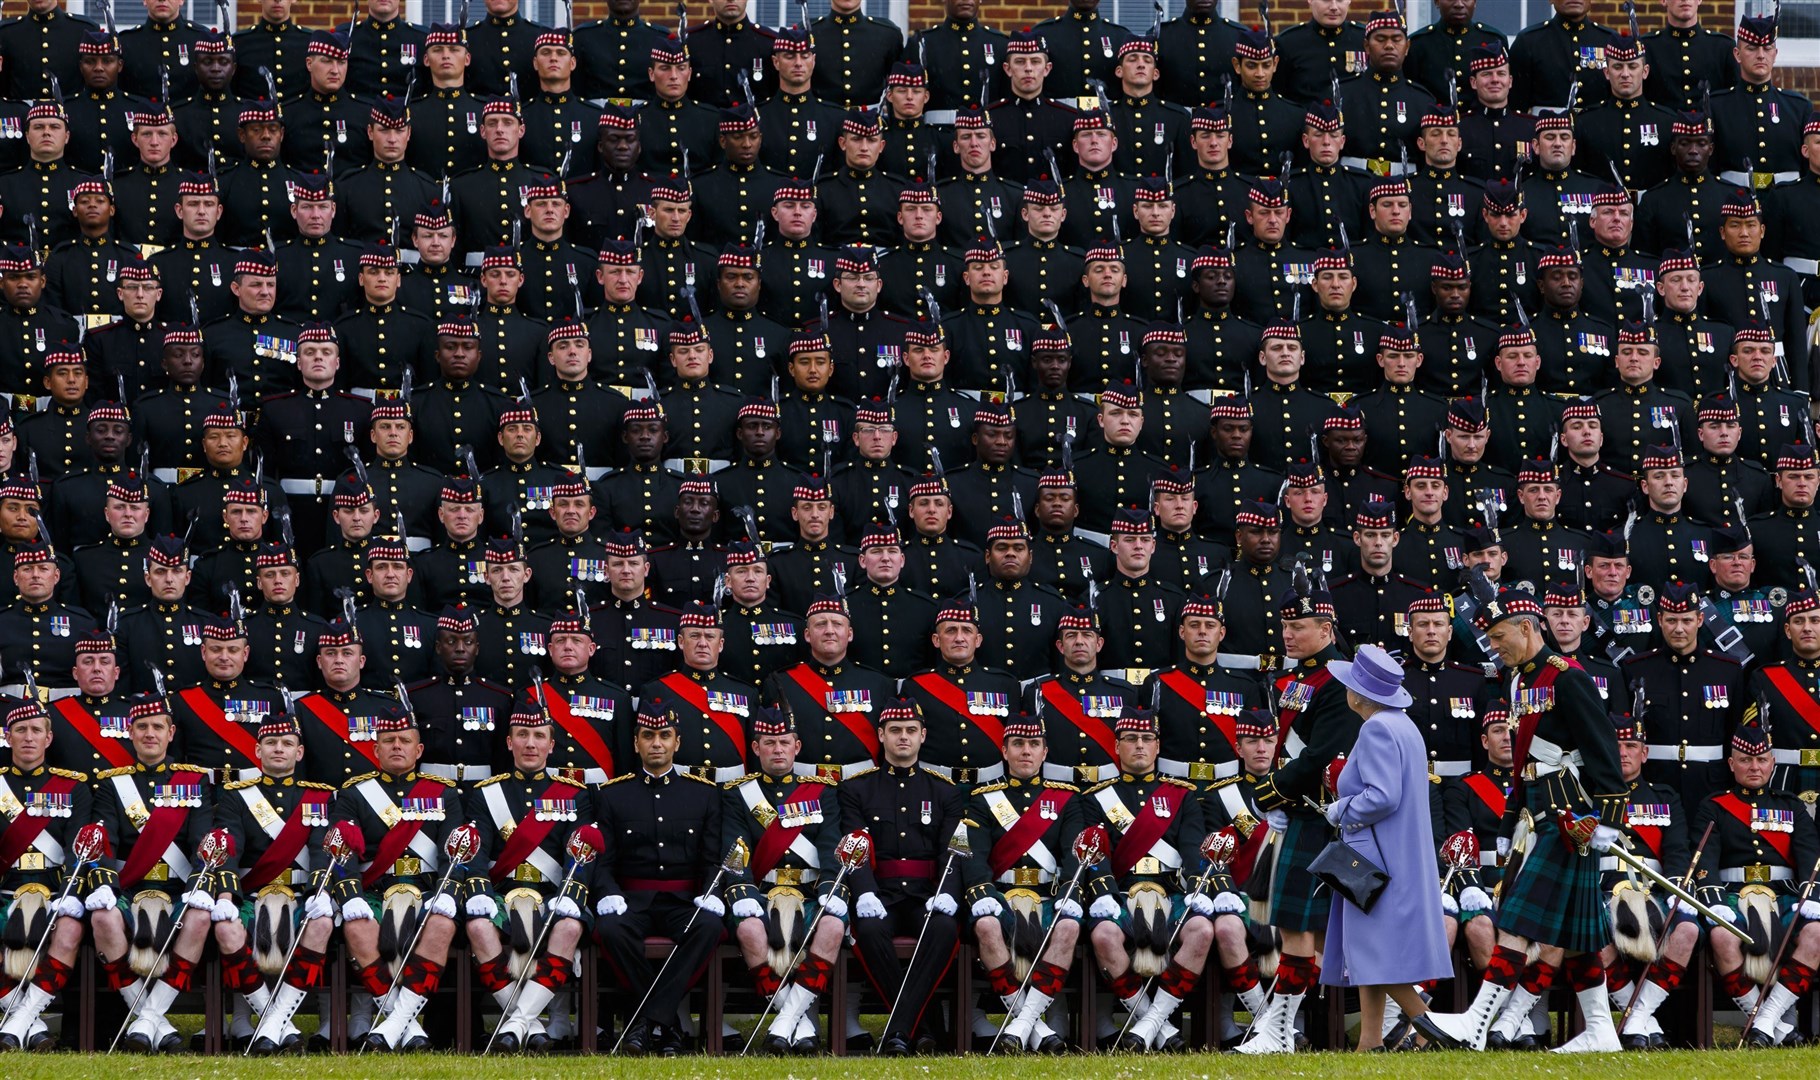 The Queen joins The Argyll & Sutherland Highlanders, 5th Battalion, Royal Regiment of Scotland for a group photograph (Chris Ison/PA)